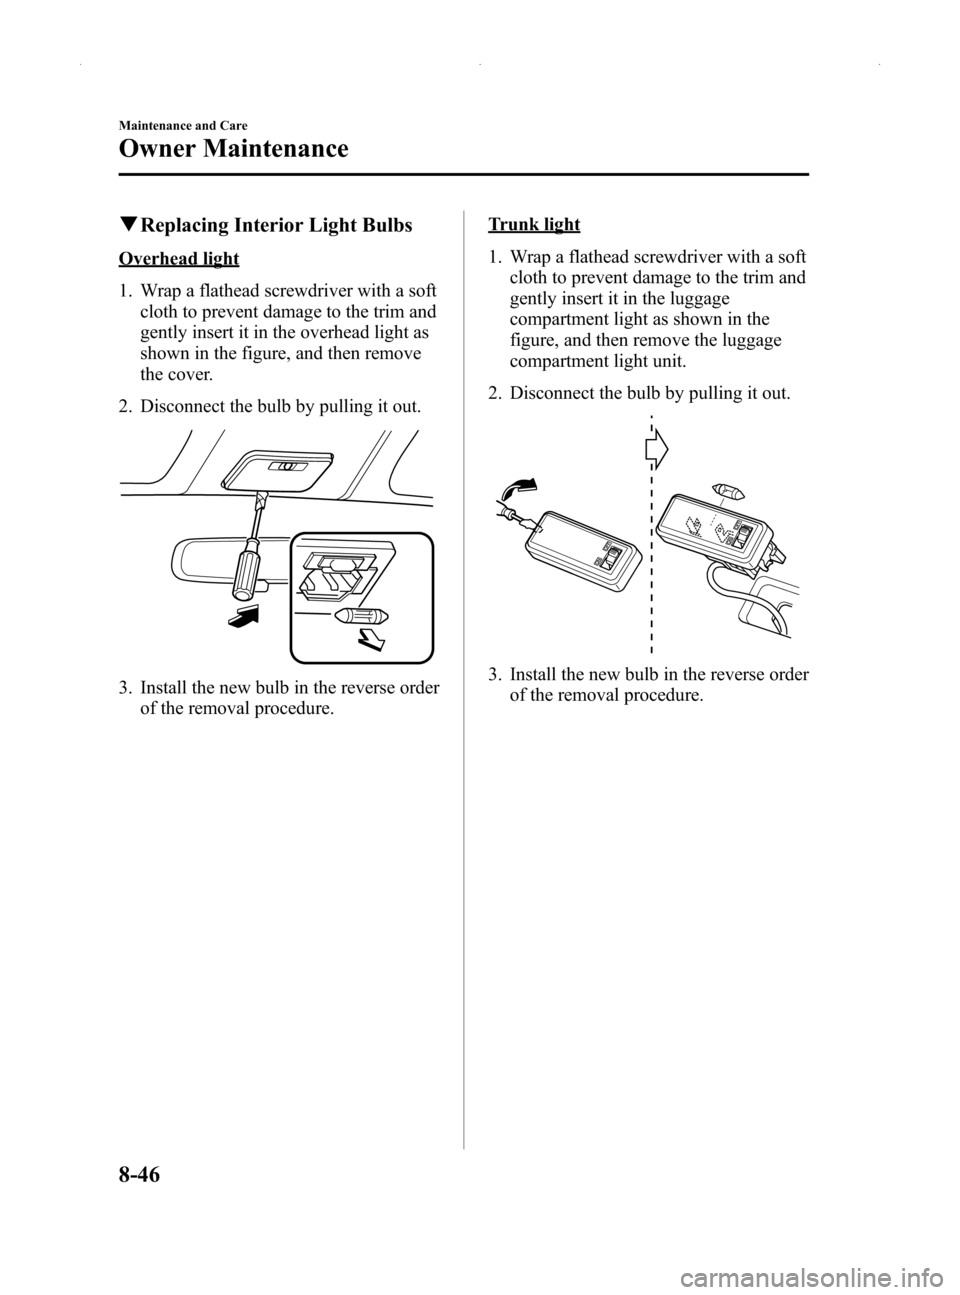 MAZDA MODEL MX-5 2014  Owners Manual (in English) Black plate (376,1)
qReplacing Interior Light Bulbs
Overhead light
1. Wrap a flathead screwdriver with a soft
cloth to prevent damage to the trim and
gently insert it in the overhead light as
shown in